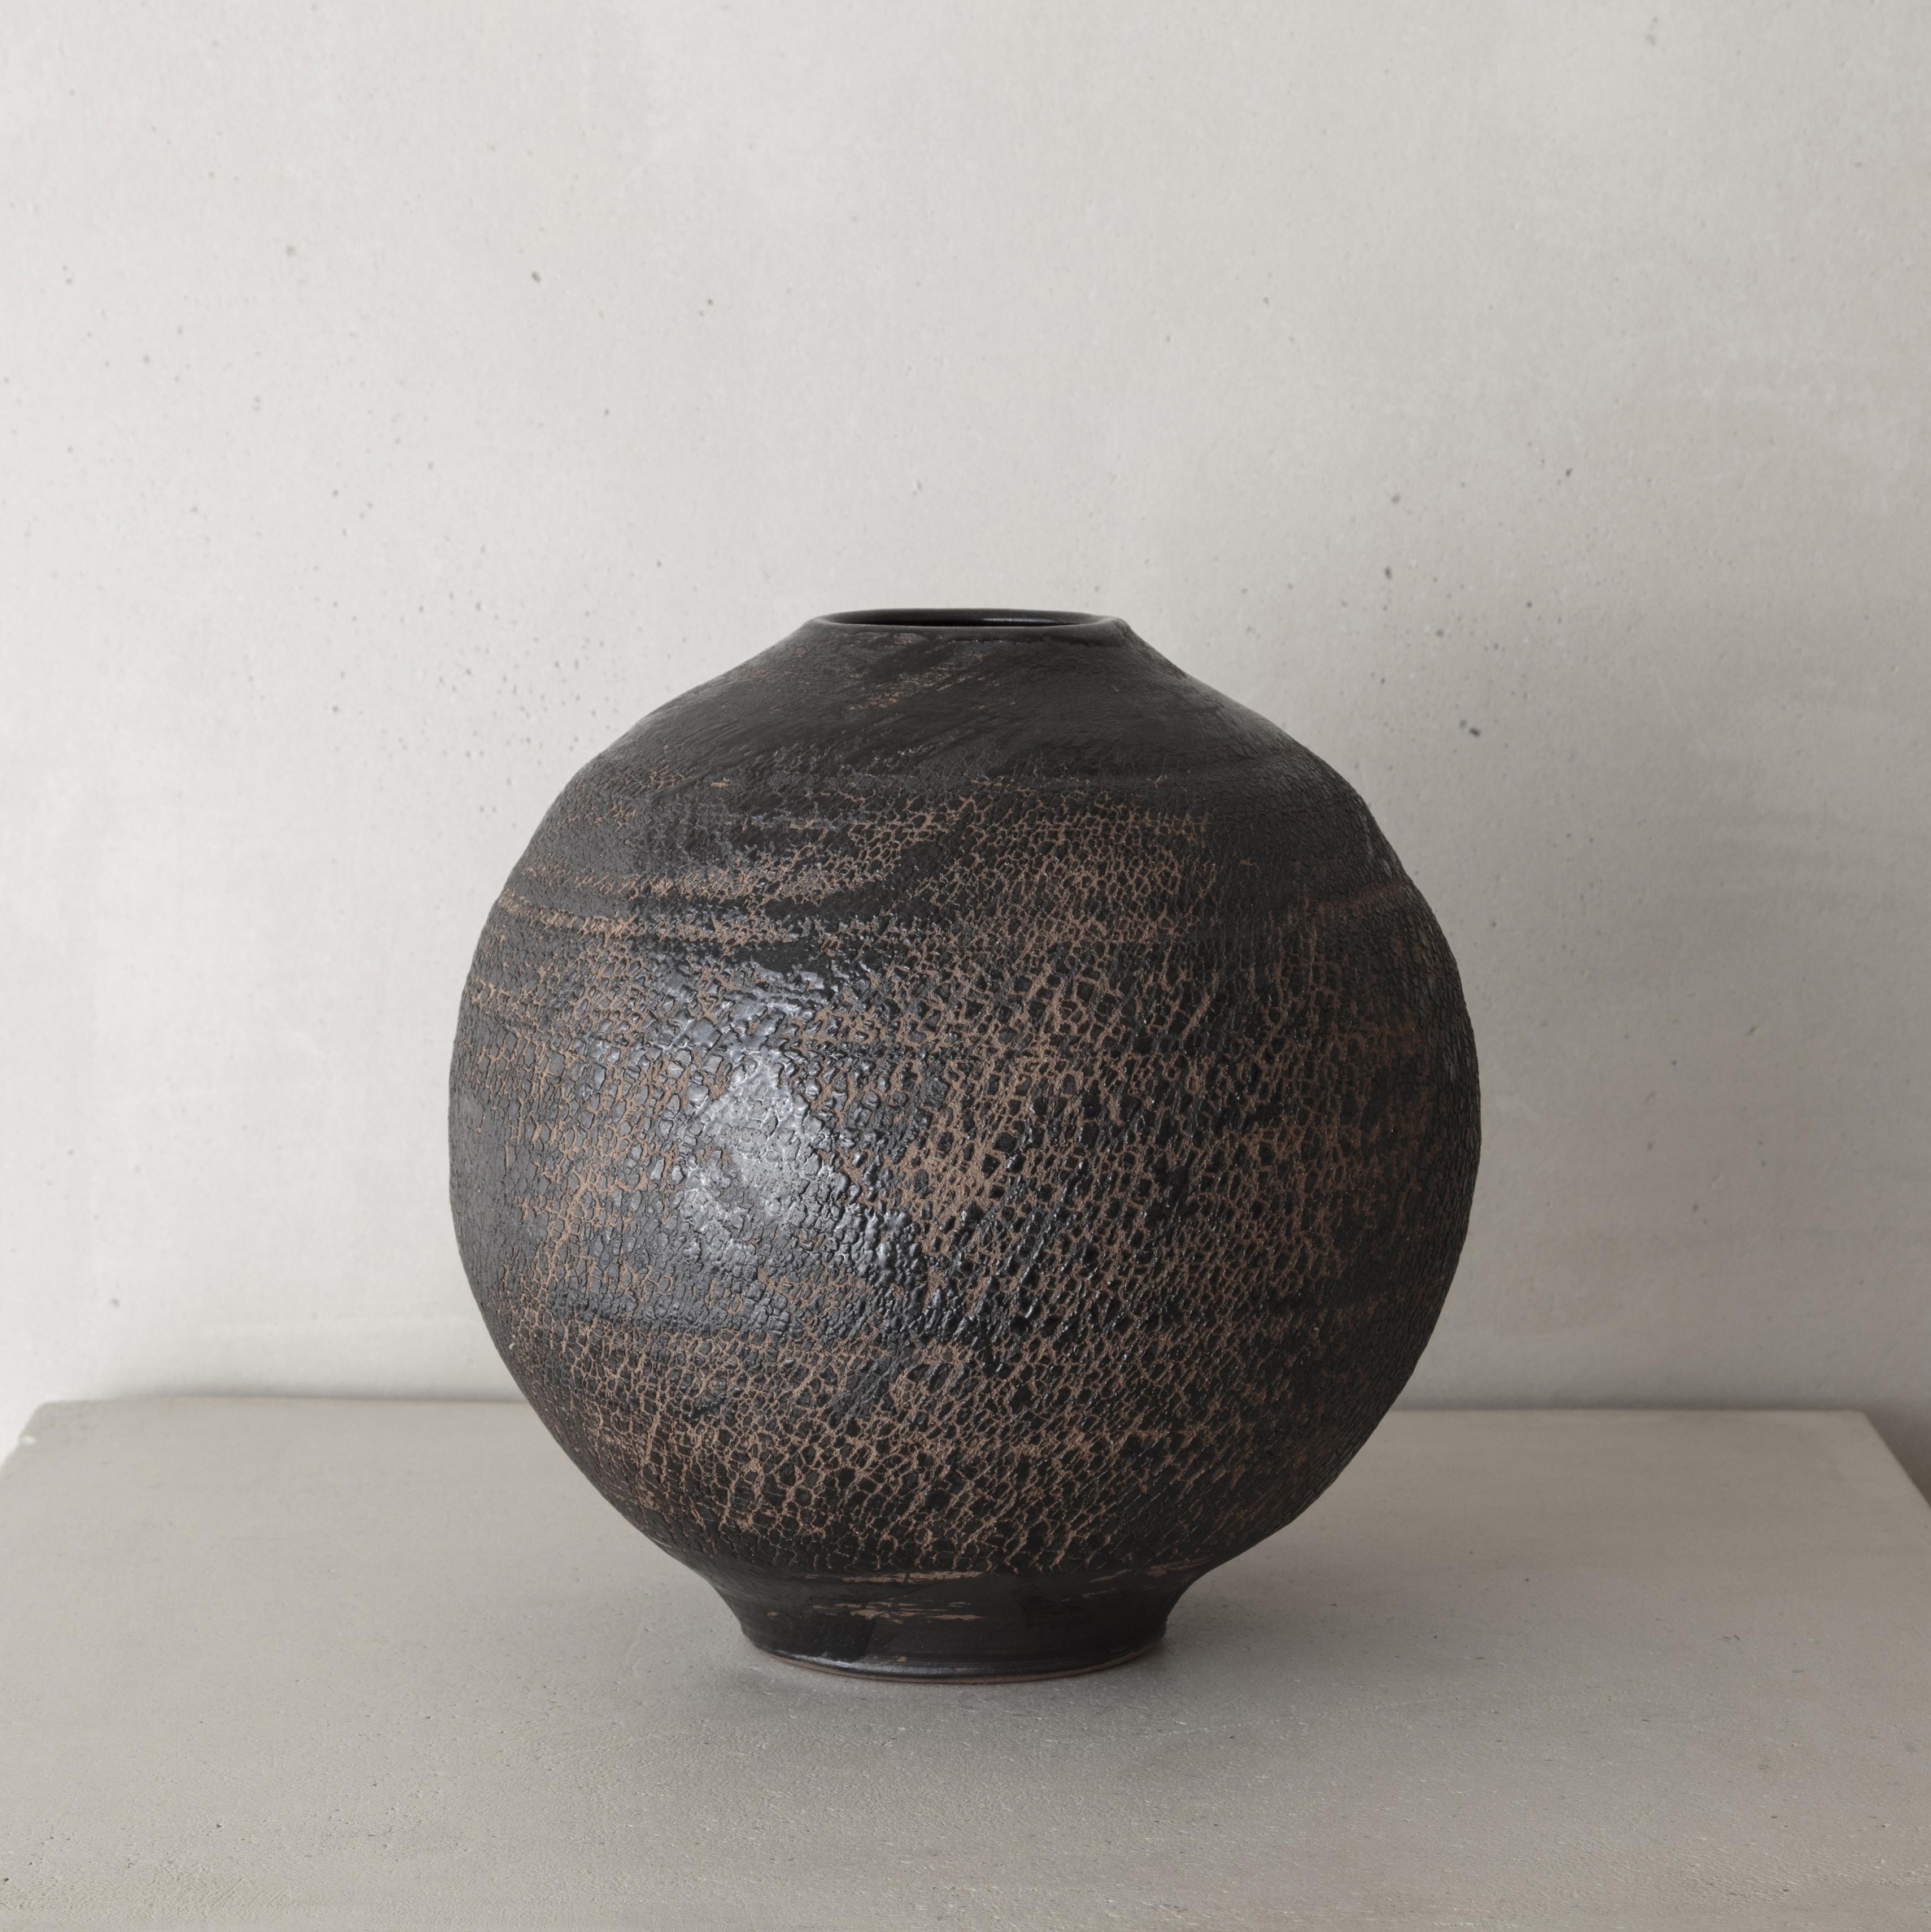 Speliopoulos’ passion for craftsmanship, organic textures and forms has informed his work throughout his creative career. This collection features highly textured vessels, reflecting the artist’s interest in the malleability and tactile expressions